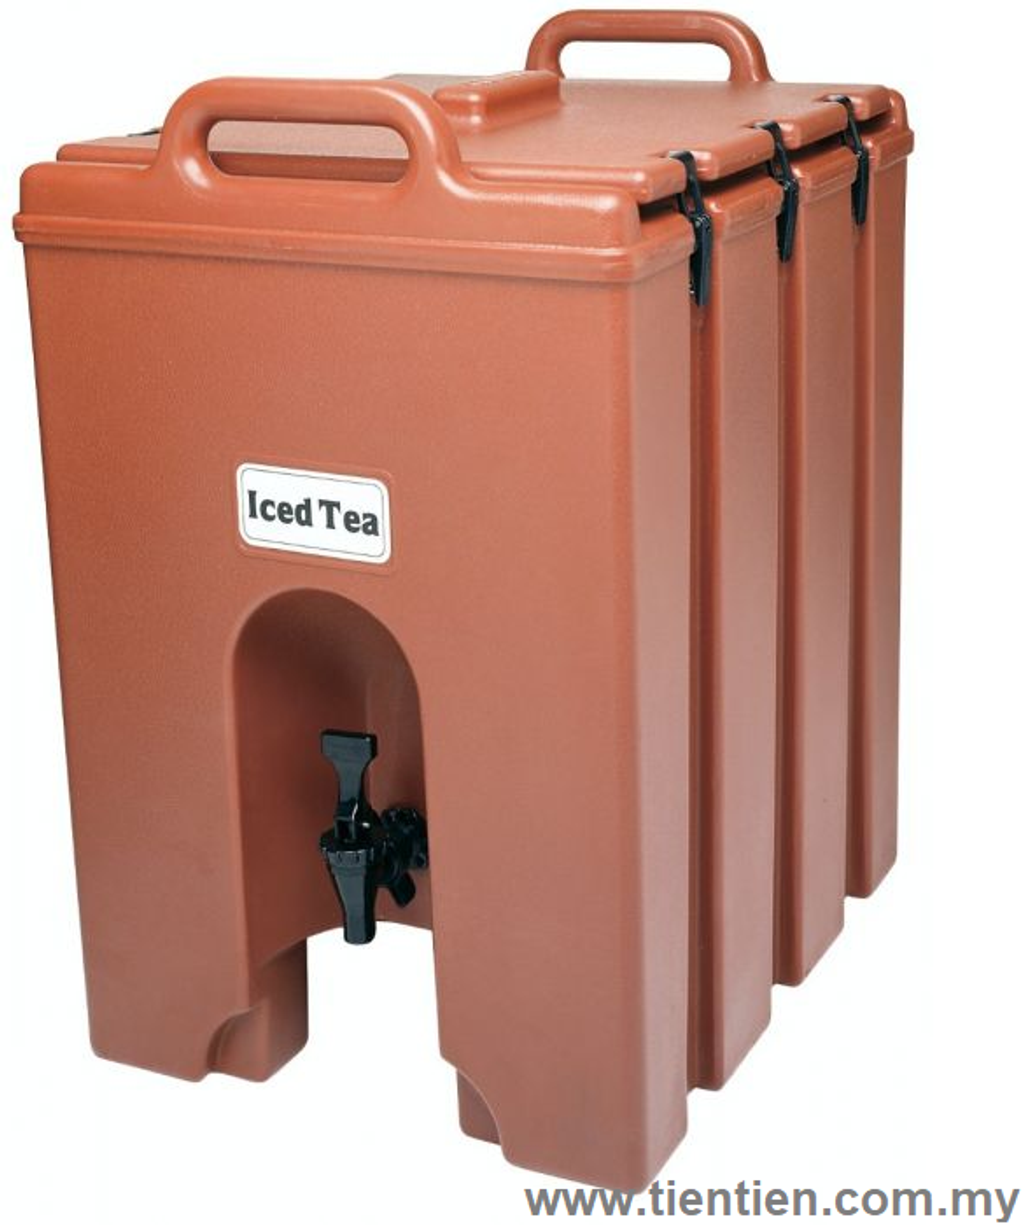 cambro-10-gallon-insulated-container-beverage-drinks-dispenser-brick-red-tientien-malaysia.png